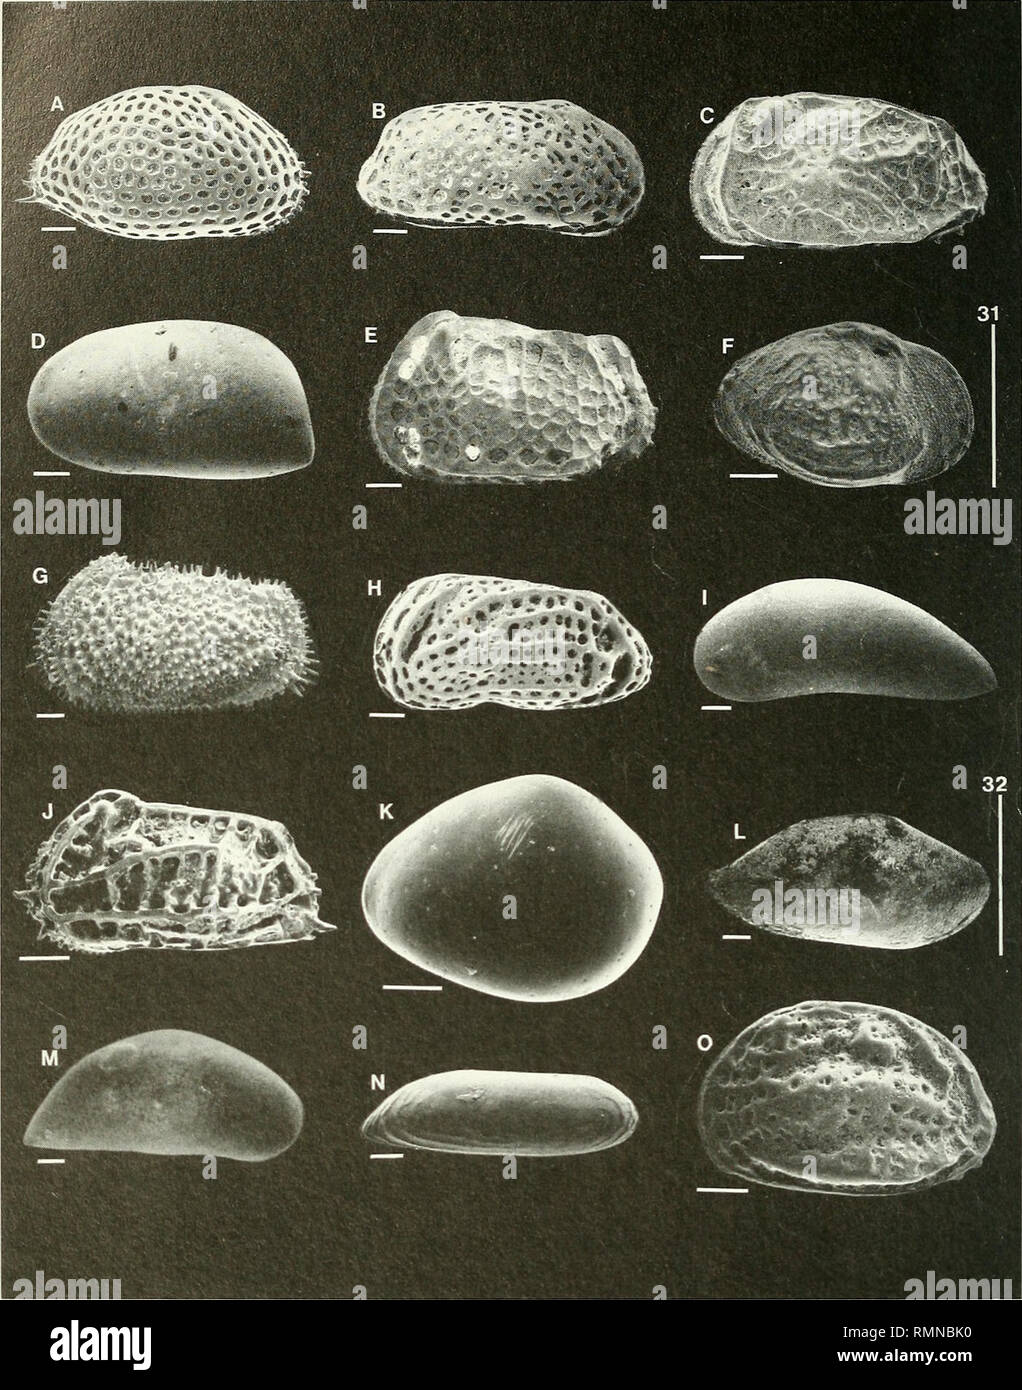 . Annals of the South African Museum = Annale van die Suid-Afrikaanse Museum. Natural history. 392 ANNALS OF THE SOUTH AFRICAN MUSEUM. Fig. 4. The most abundant ostracod species on the continental shelf off south-western Africa arranged in order of latitudinal centre of distribution (mean of all observed sites, see Figure 6). Vertical bars are degrees of latitude (S); horizontal scales = 100 fi. A = Pseudokeijella lepralioides, B = Urocythereis arcana, C = Ambostracon keeleri, D = Krithe capensis, E = Poseidonamicus panopsus, F = Buntonia bremneri, G = Henryhowella melobesioides, H = Doratocyt Stock Photo